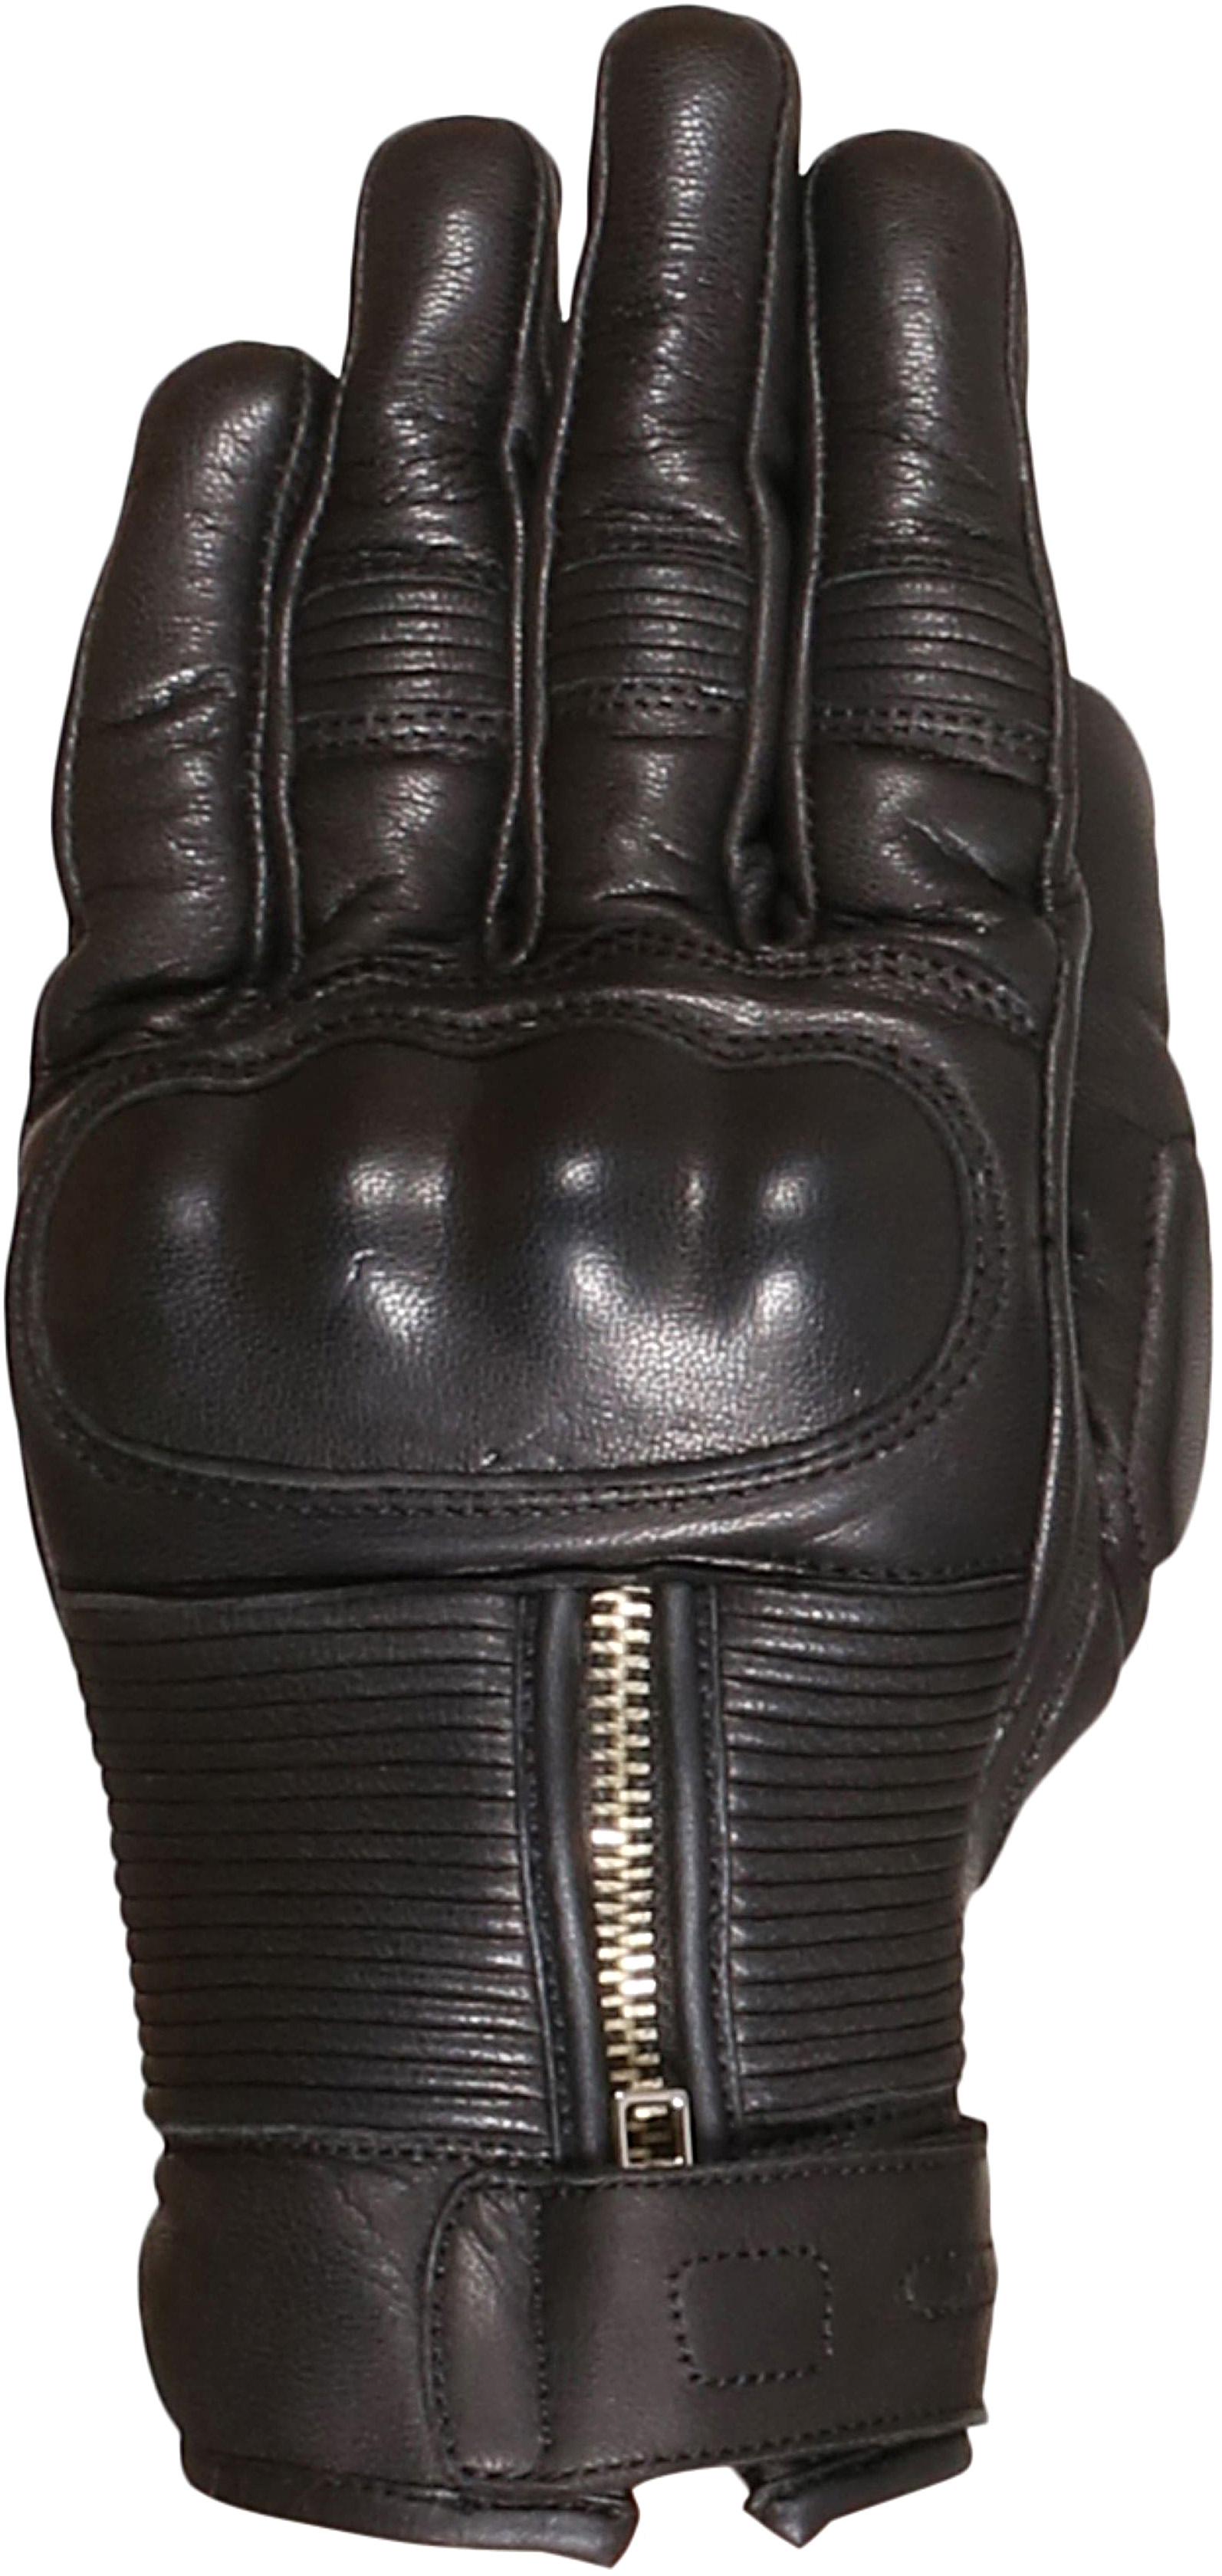 Weise Union Motorcycle Gloves - Black, 3Xl